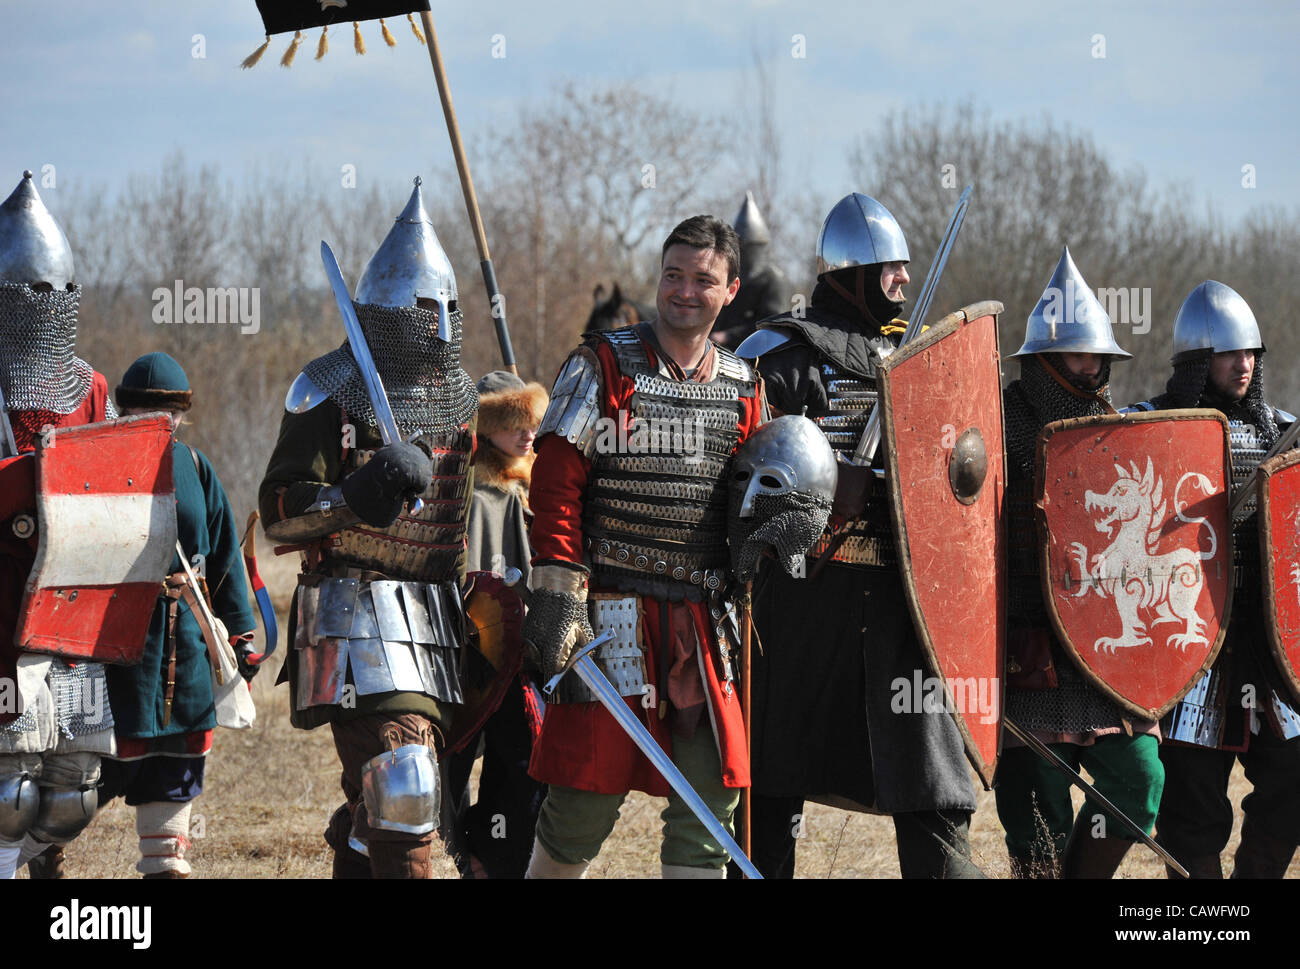 April 22, 2012 - Russia - Pskov region of Russia.Pictured:Historical reconstruction of the The Battle of the Ice (also known as the Battle of Lake Peipus) to mark 770 anniversary of the Battle...The Battle of Lake Peipus was a battle between the Republic of Novgorod and the Livonian branch of the Te Stock Photo